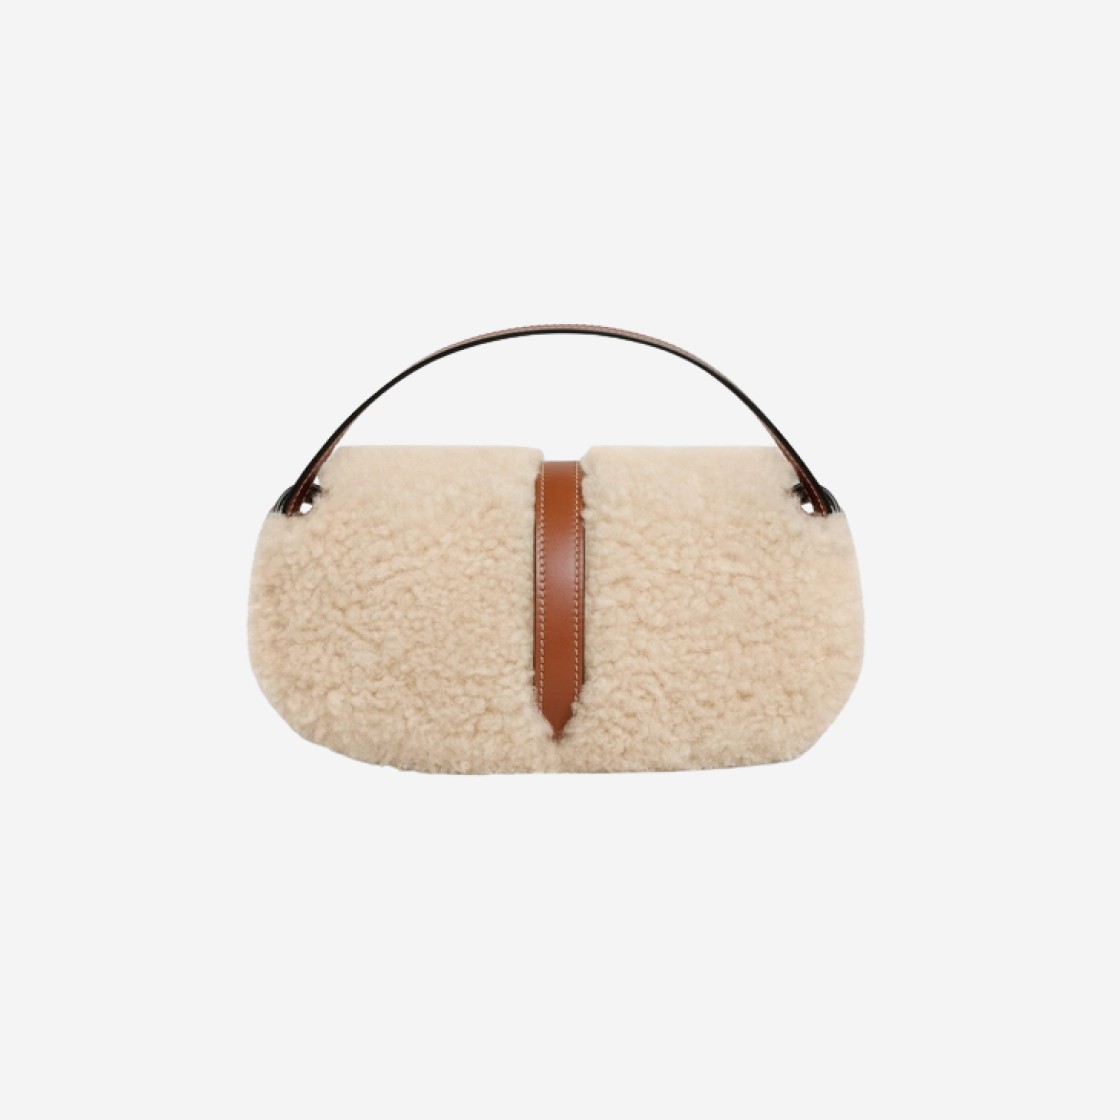 CLUTCH ON STRAP TABOU IN SHEARLING AND CALFSKIN - NATURAL / TAN